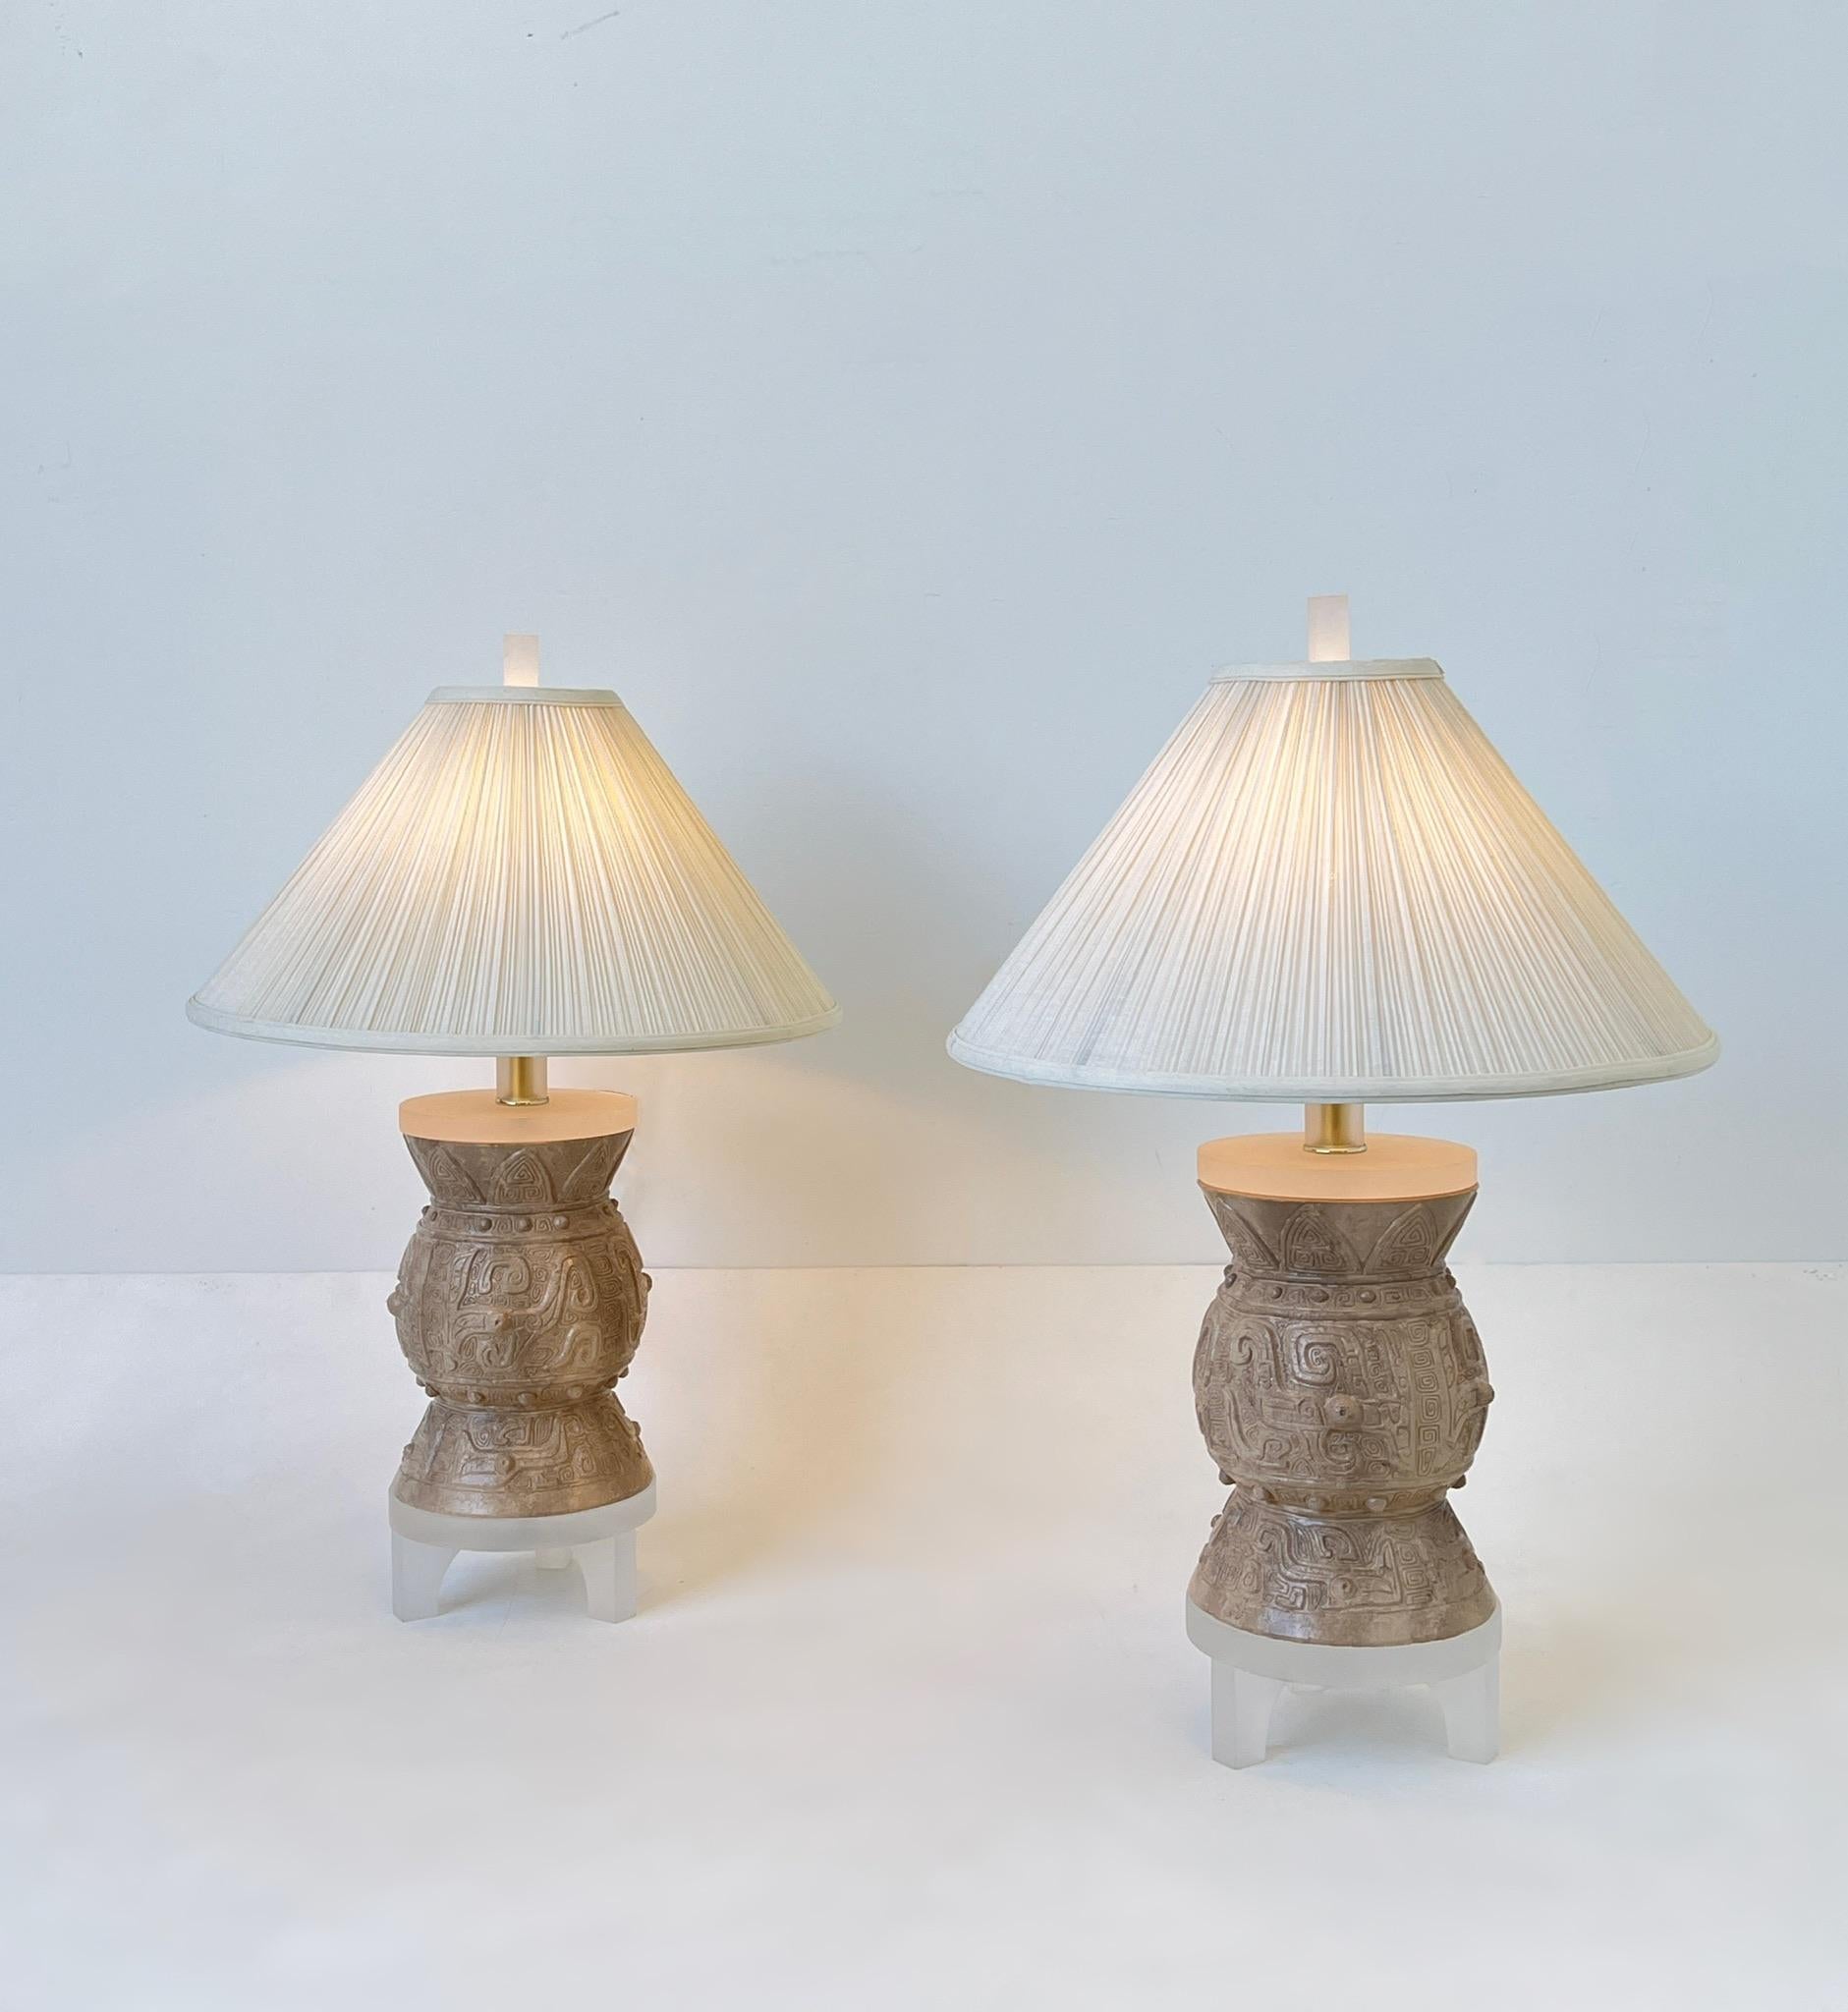 Glamorous 1991 pair of plaster and satin lucite with polish brass hardware table lamps by Bauer Lamp Co. 
New polish brass hardware, silk shades are original. 
Measurements: 19” Diameter, 27.5” High, 8” Diameter Base.